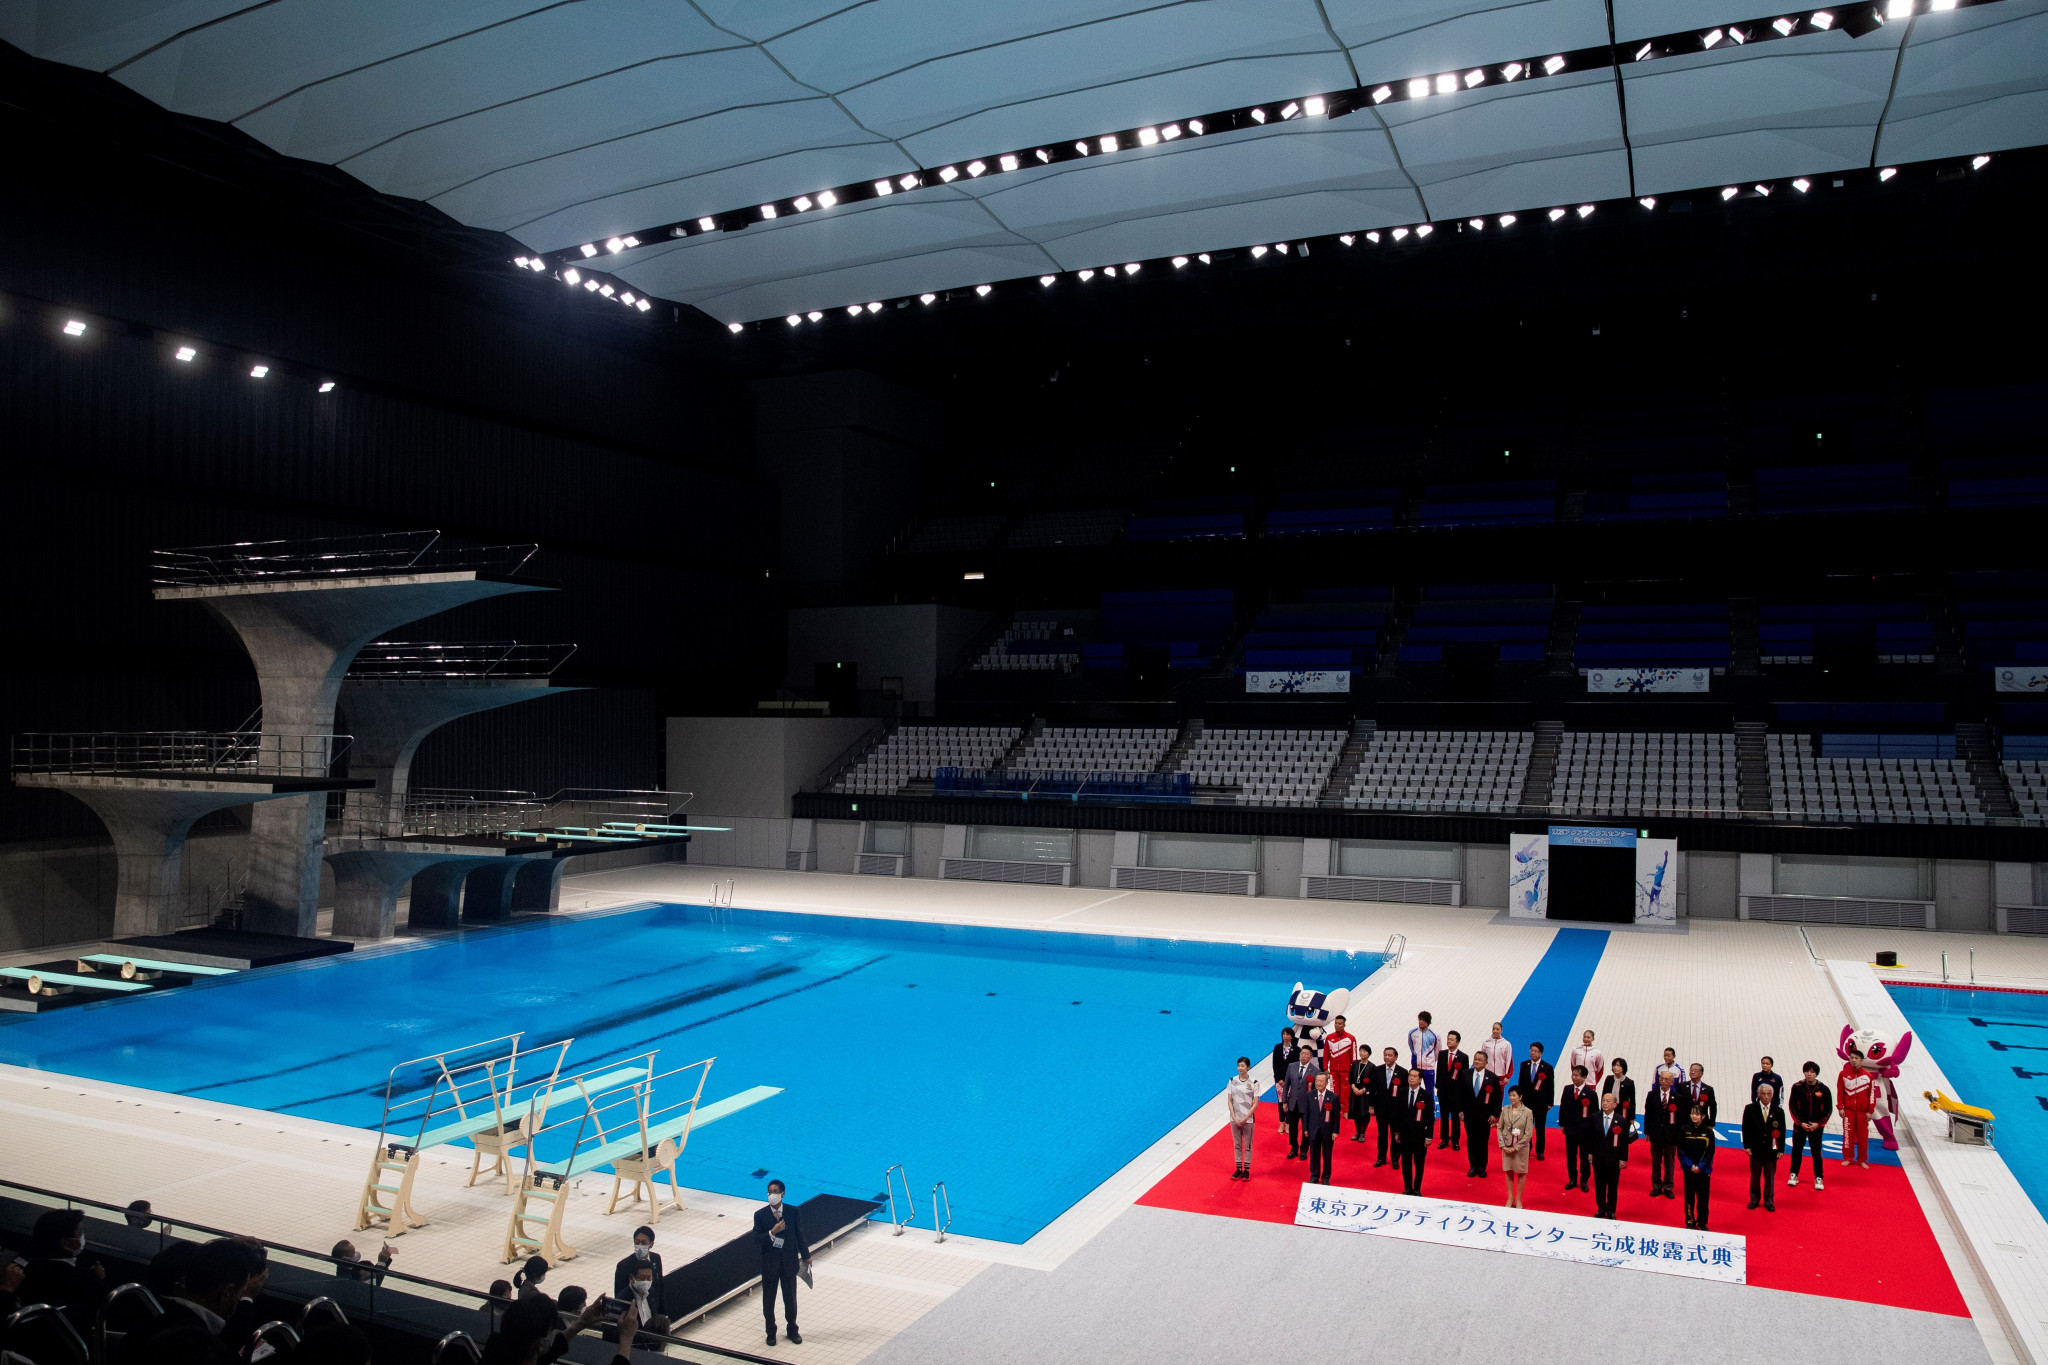 A grand Opening Ceremony took place at the Aquatics Centre for the Tokyo 2020 Olympic and Paralympic Games ©Getty Images